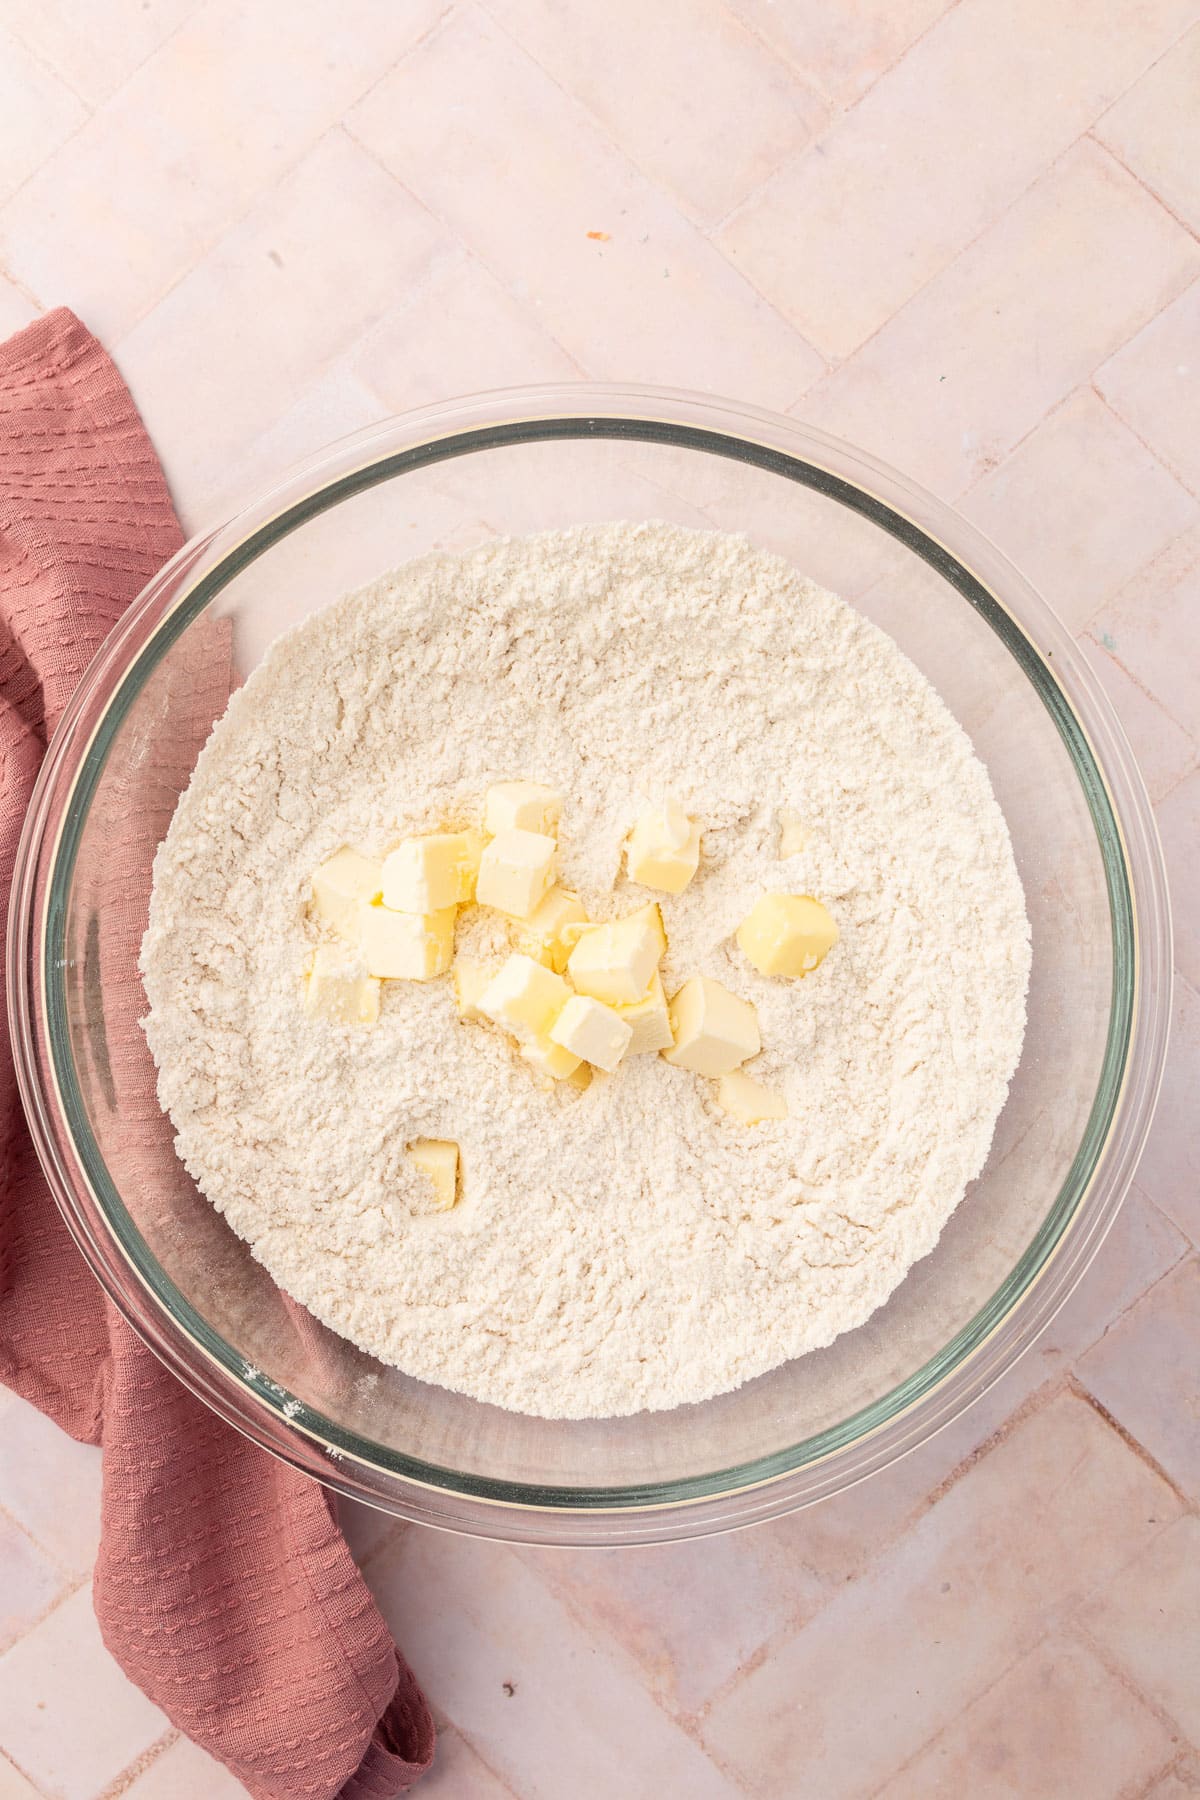 An overhead view of a glass mixing bowl with a gluten-free flour blend topped with cubes of cold unsalted butter.